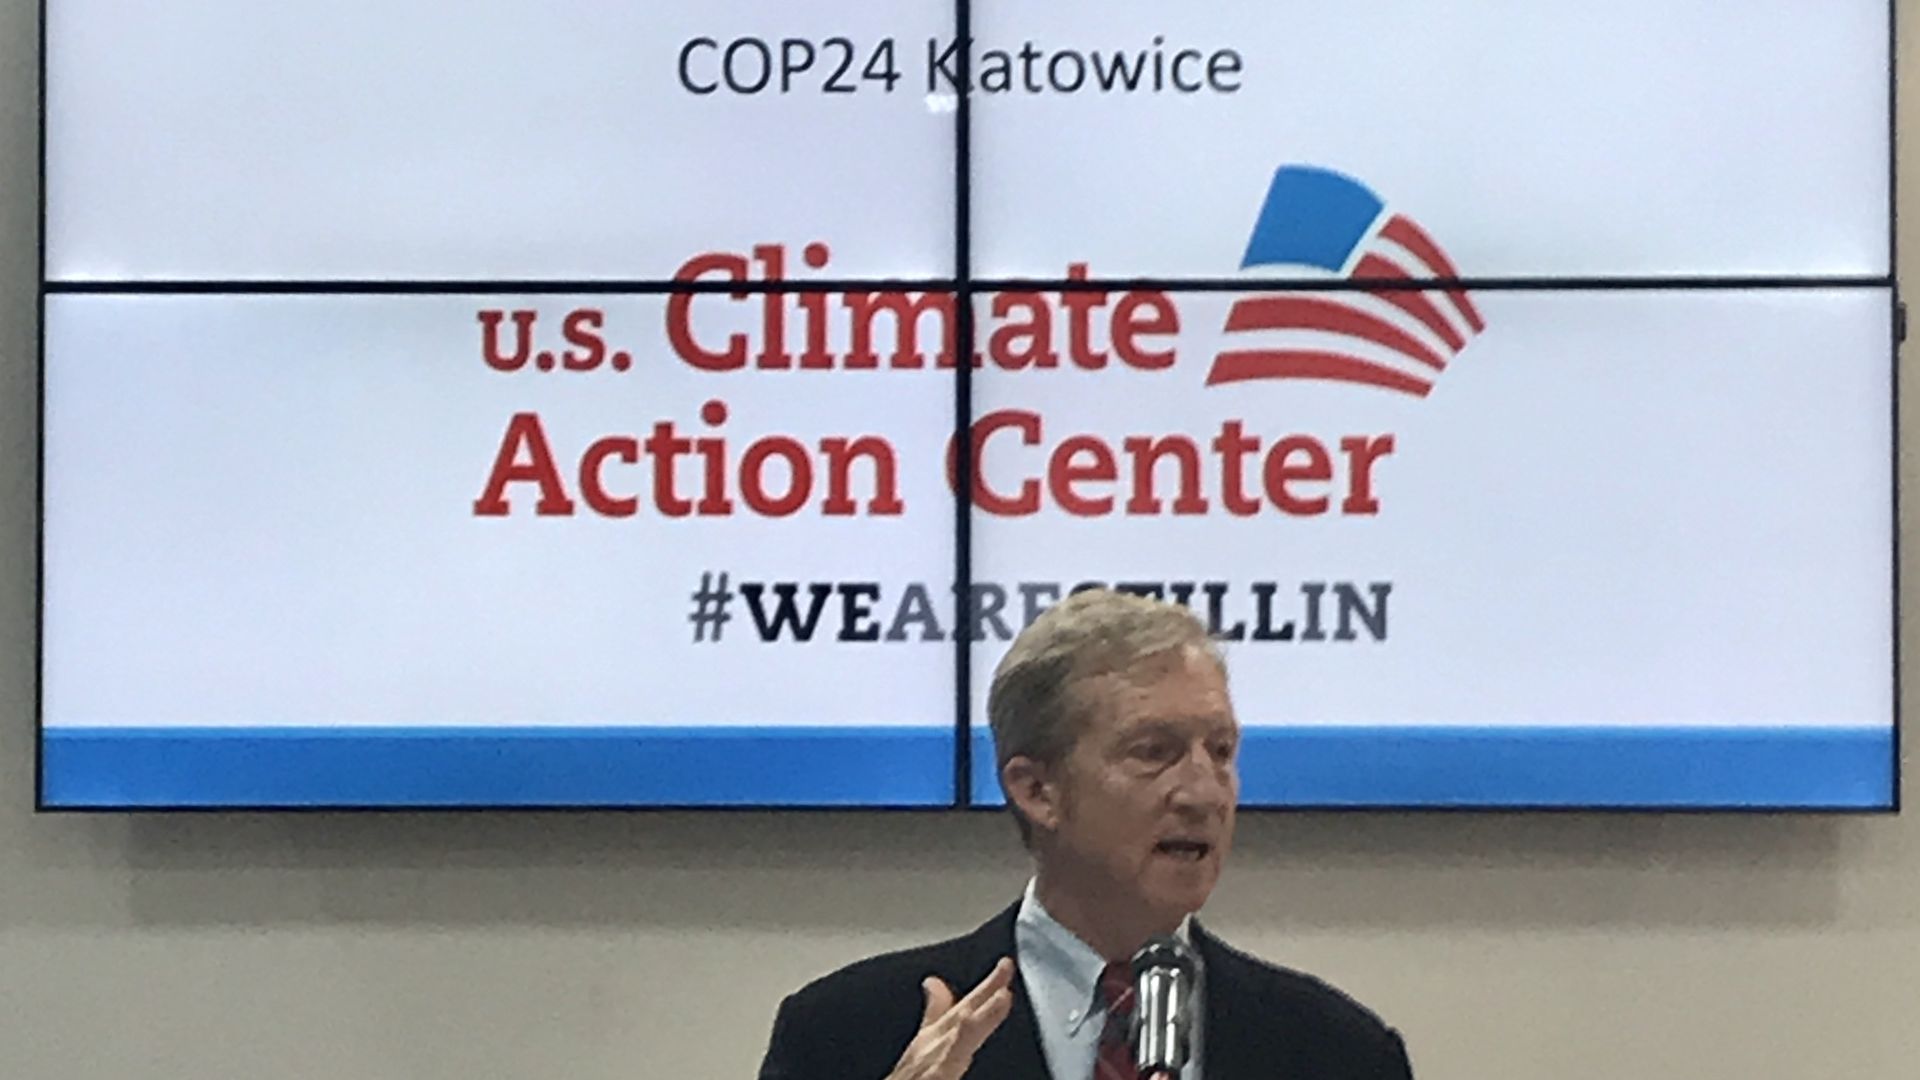 Liberal activist Tom Steyer at climate-change conference in Poland.